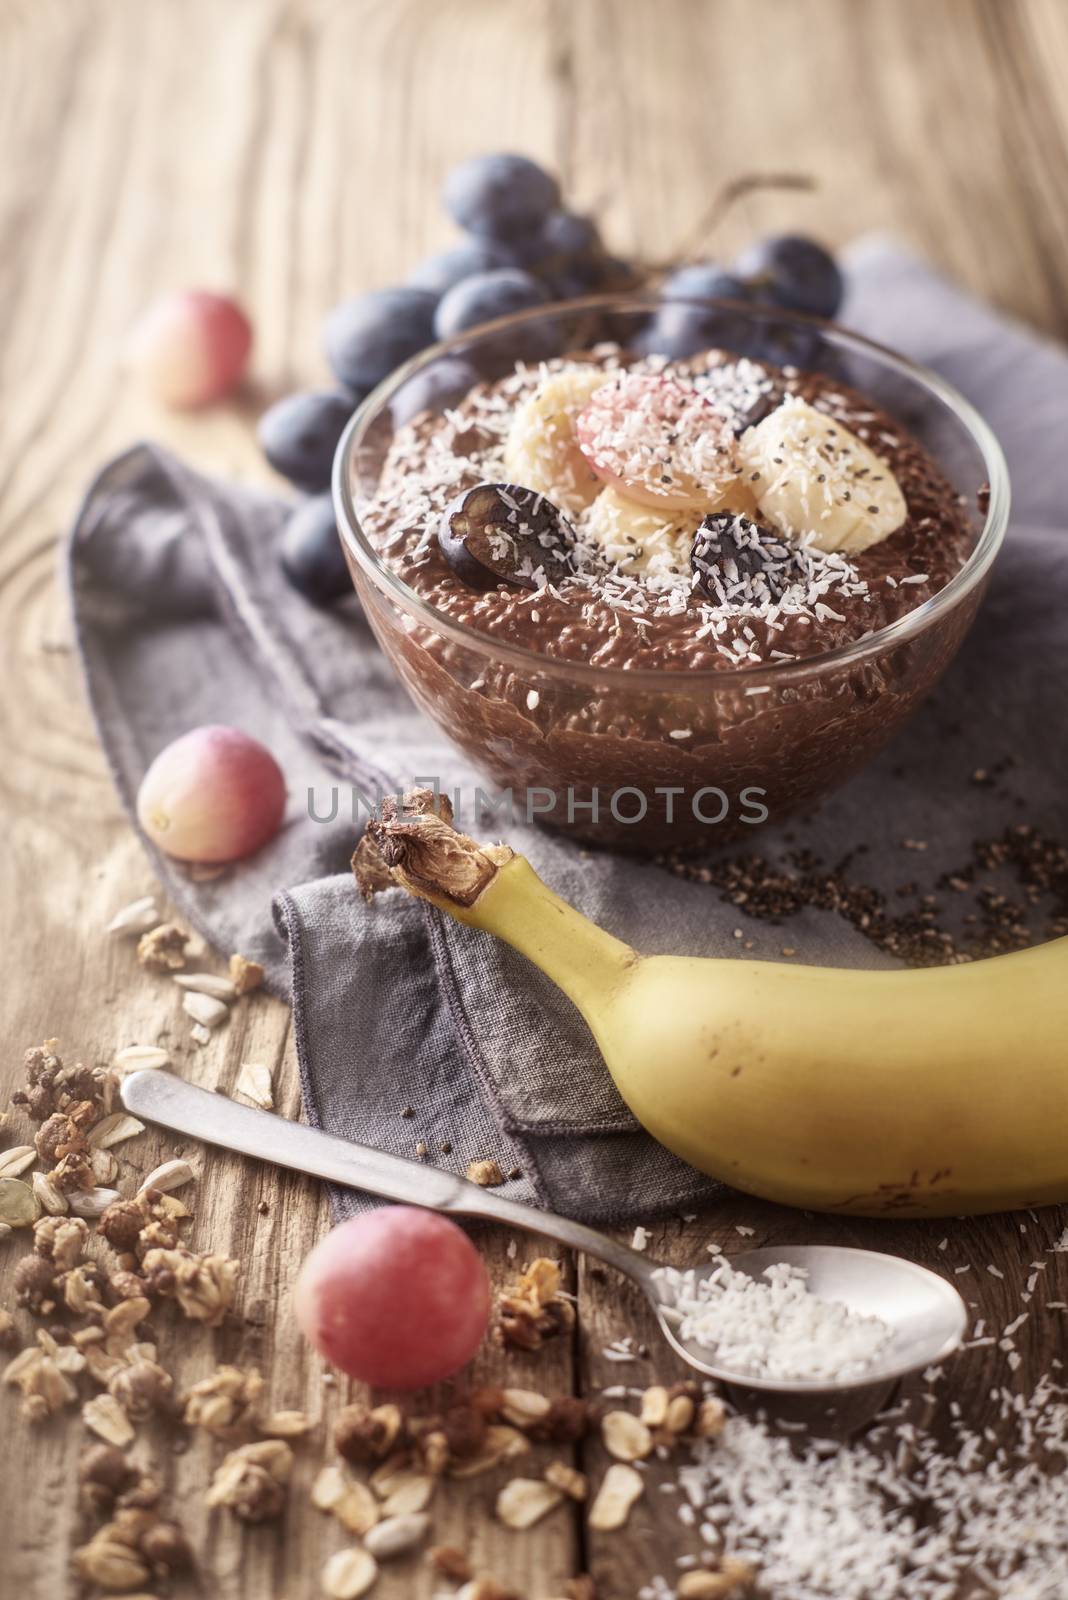 Chocolate chia pudding with fruit in the glass bowl on the wooden table